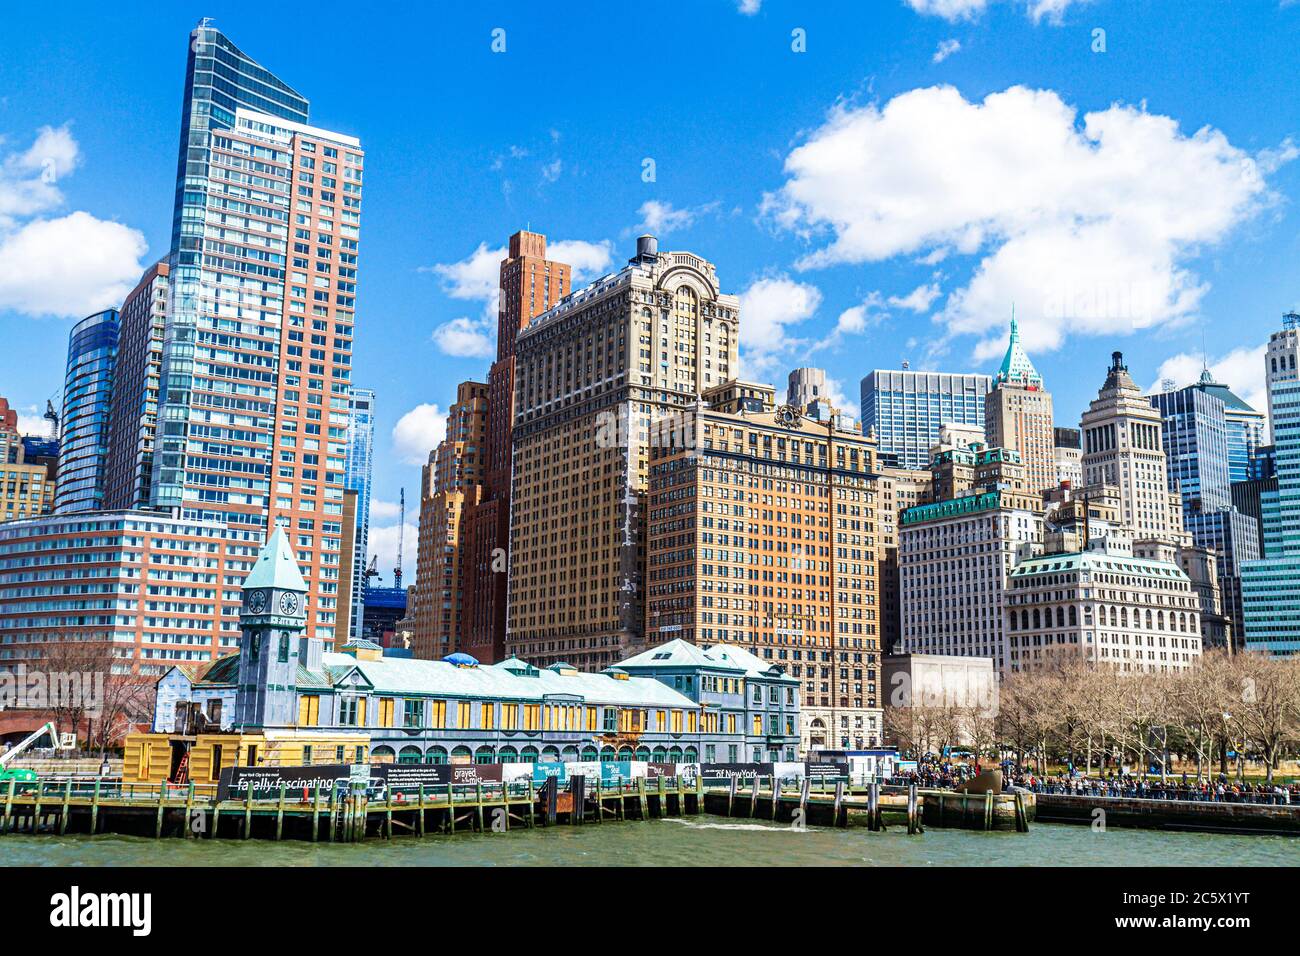 New York City,NYC NY Lower,Manhattan,Battery Park,Financial District,FiDi,New York Harbor,harbour,Hudson River,Statue Cruises,City Pier A,clock tower, Stock Photo